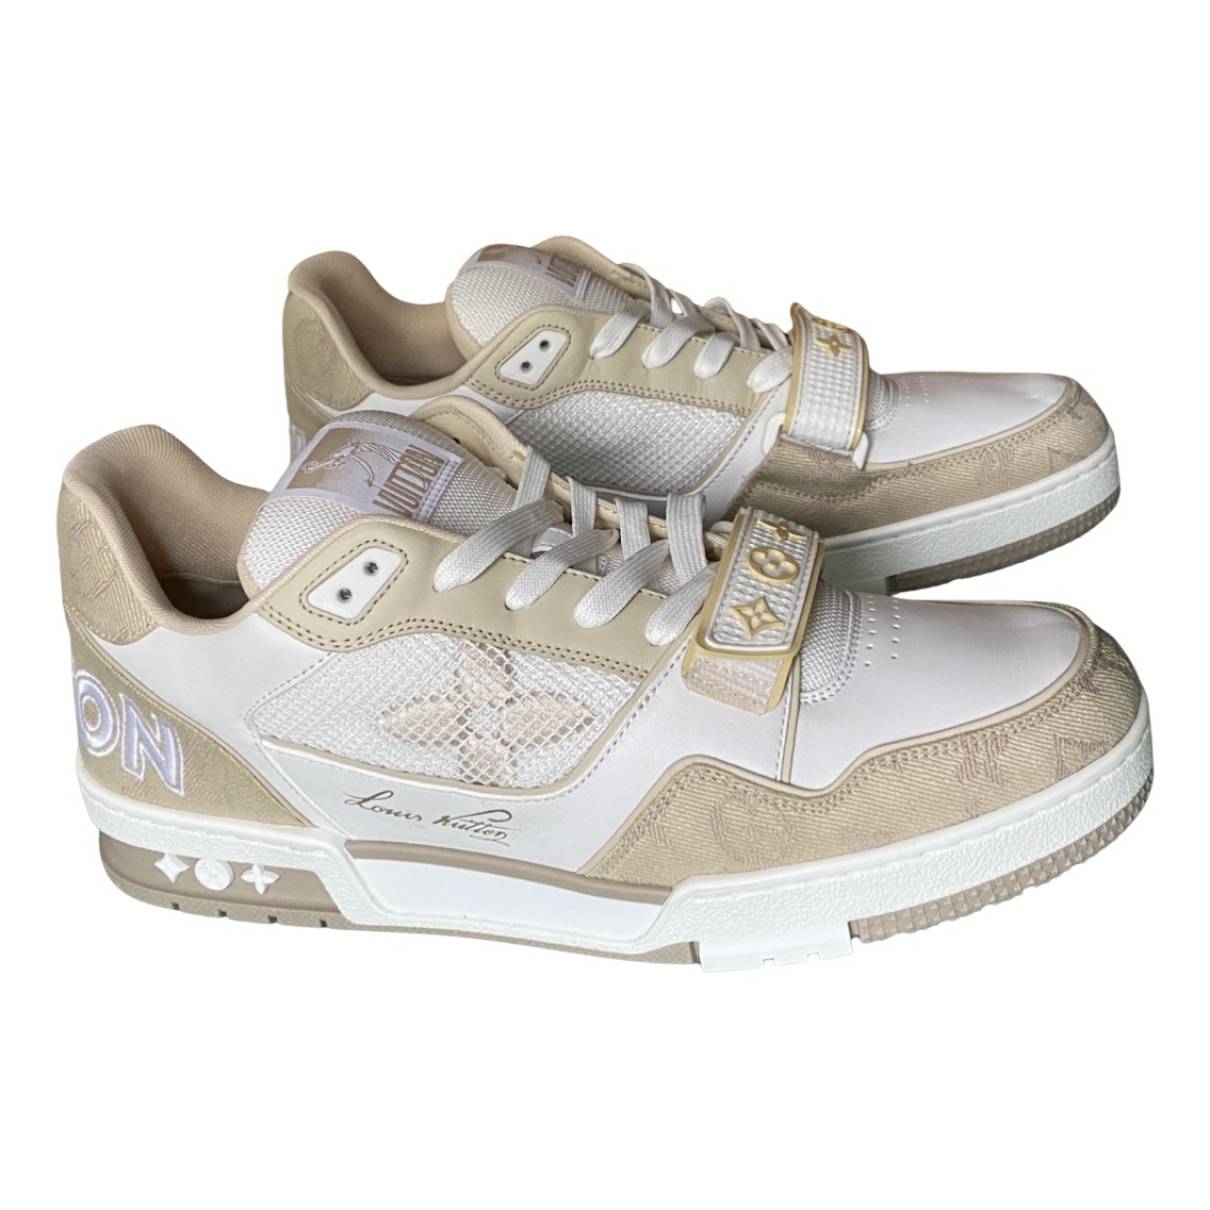 Lv trainer low trainers Louis Vuitton Beige size 6 UK in Other - 32030740